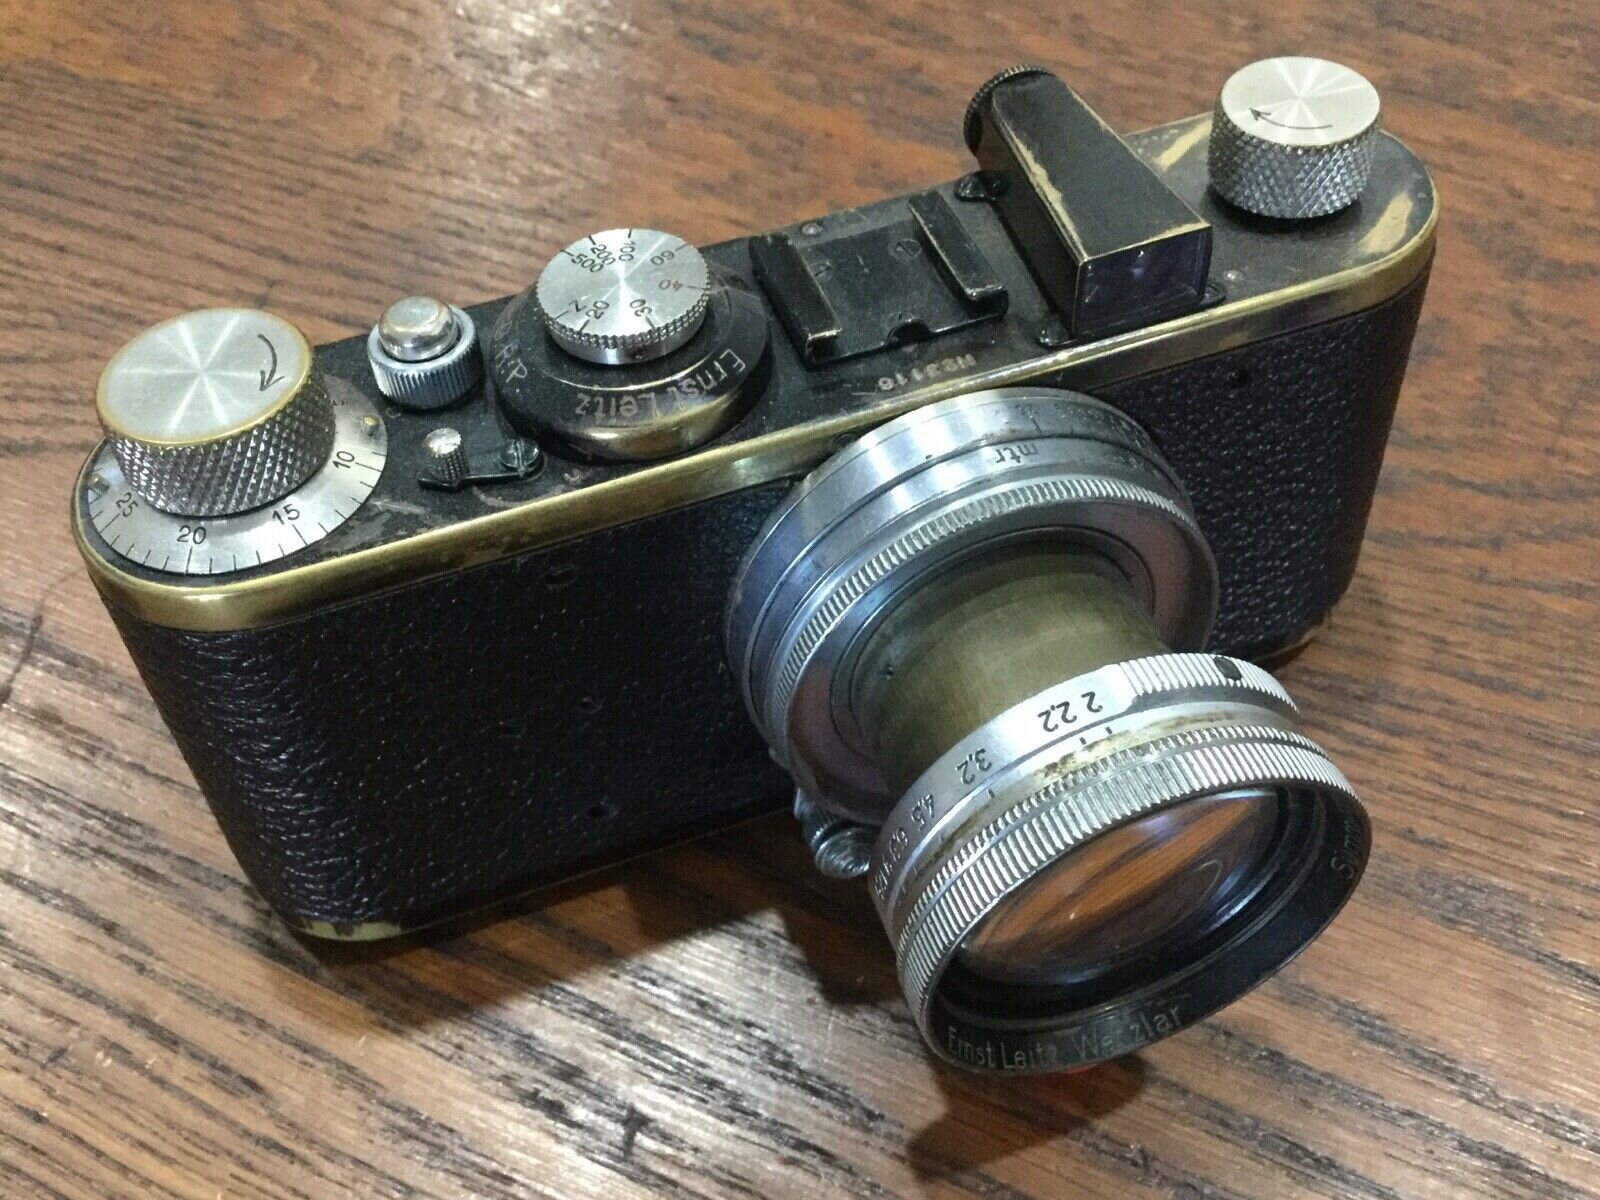 Leica I 4-digit converted to Leica Standard, shown with 50mm f2 Summar